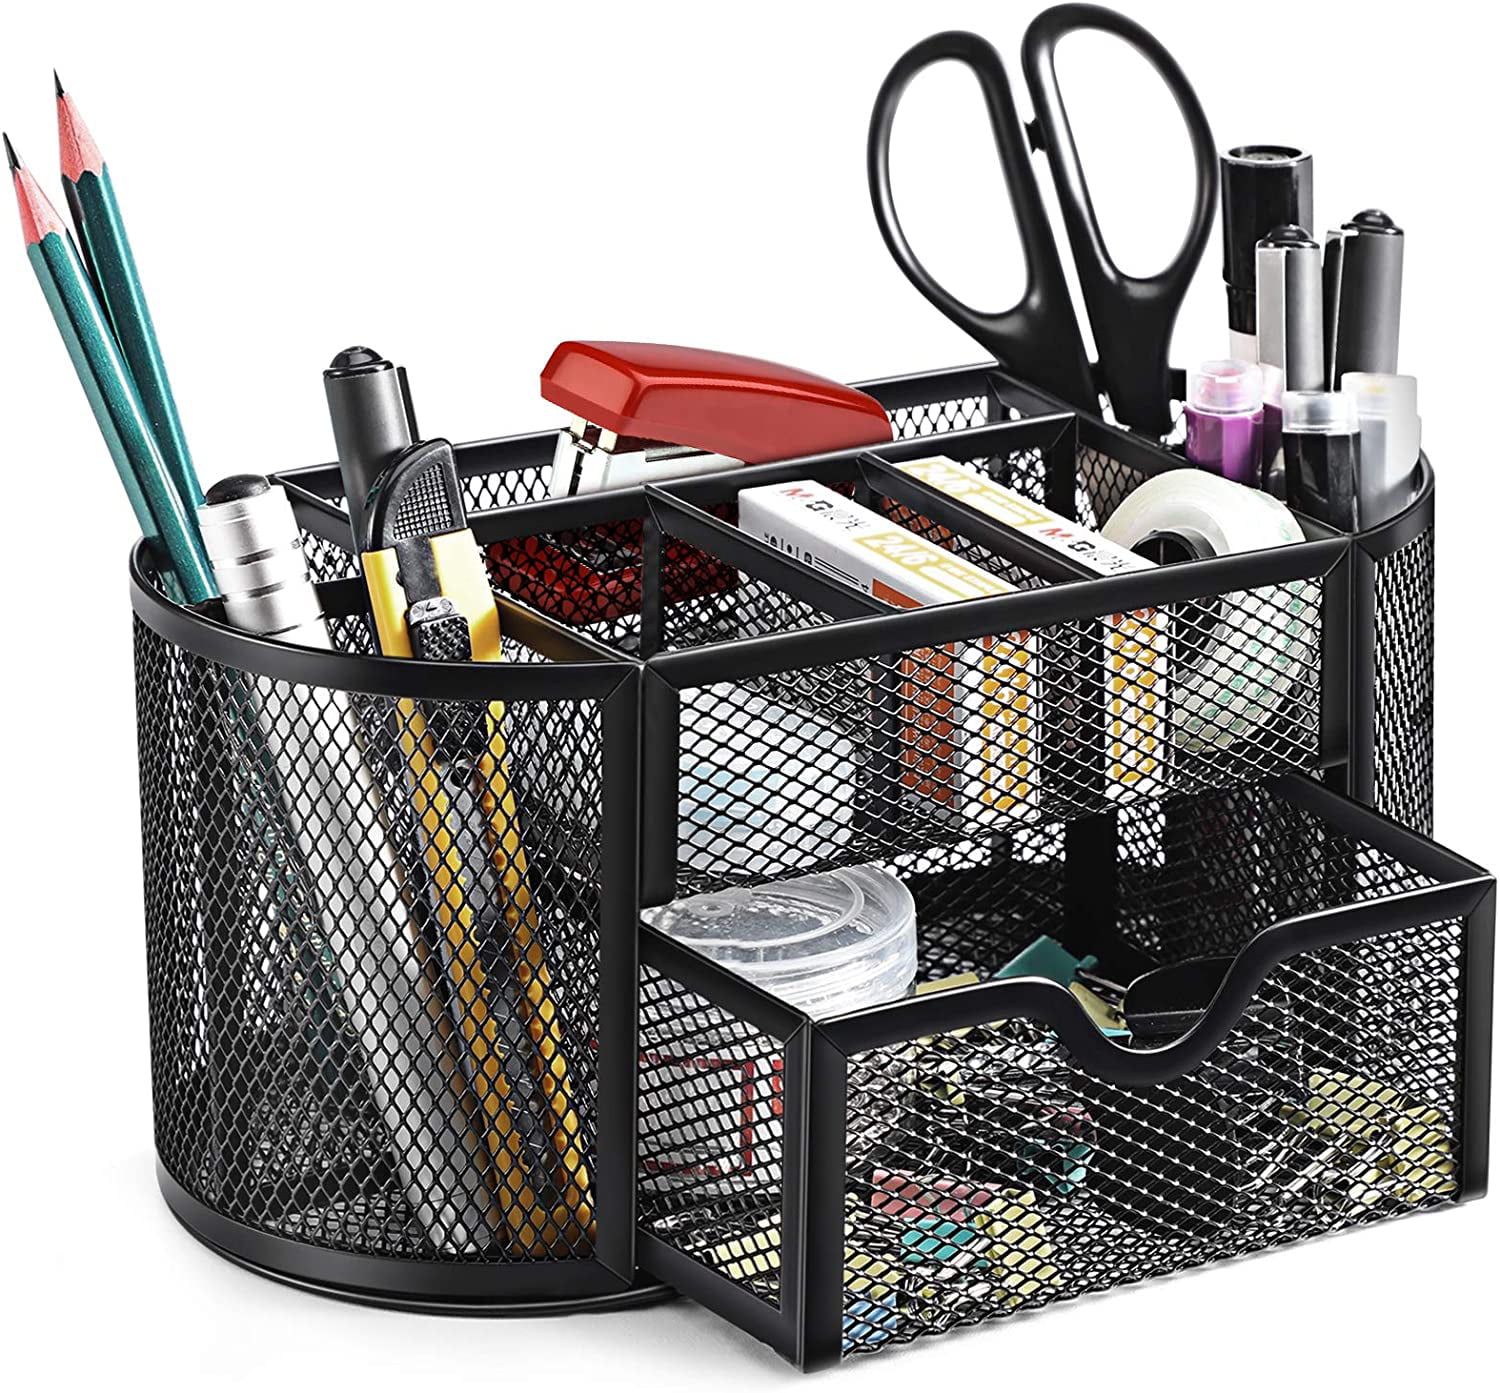 Desktop Metal Storage Mesh With Large Drawers Fit For Pencil And Pen Holders US 